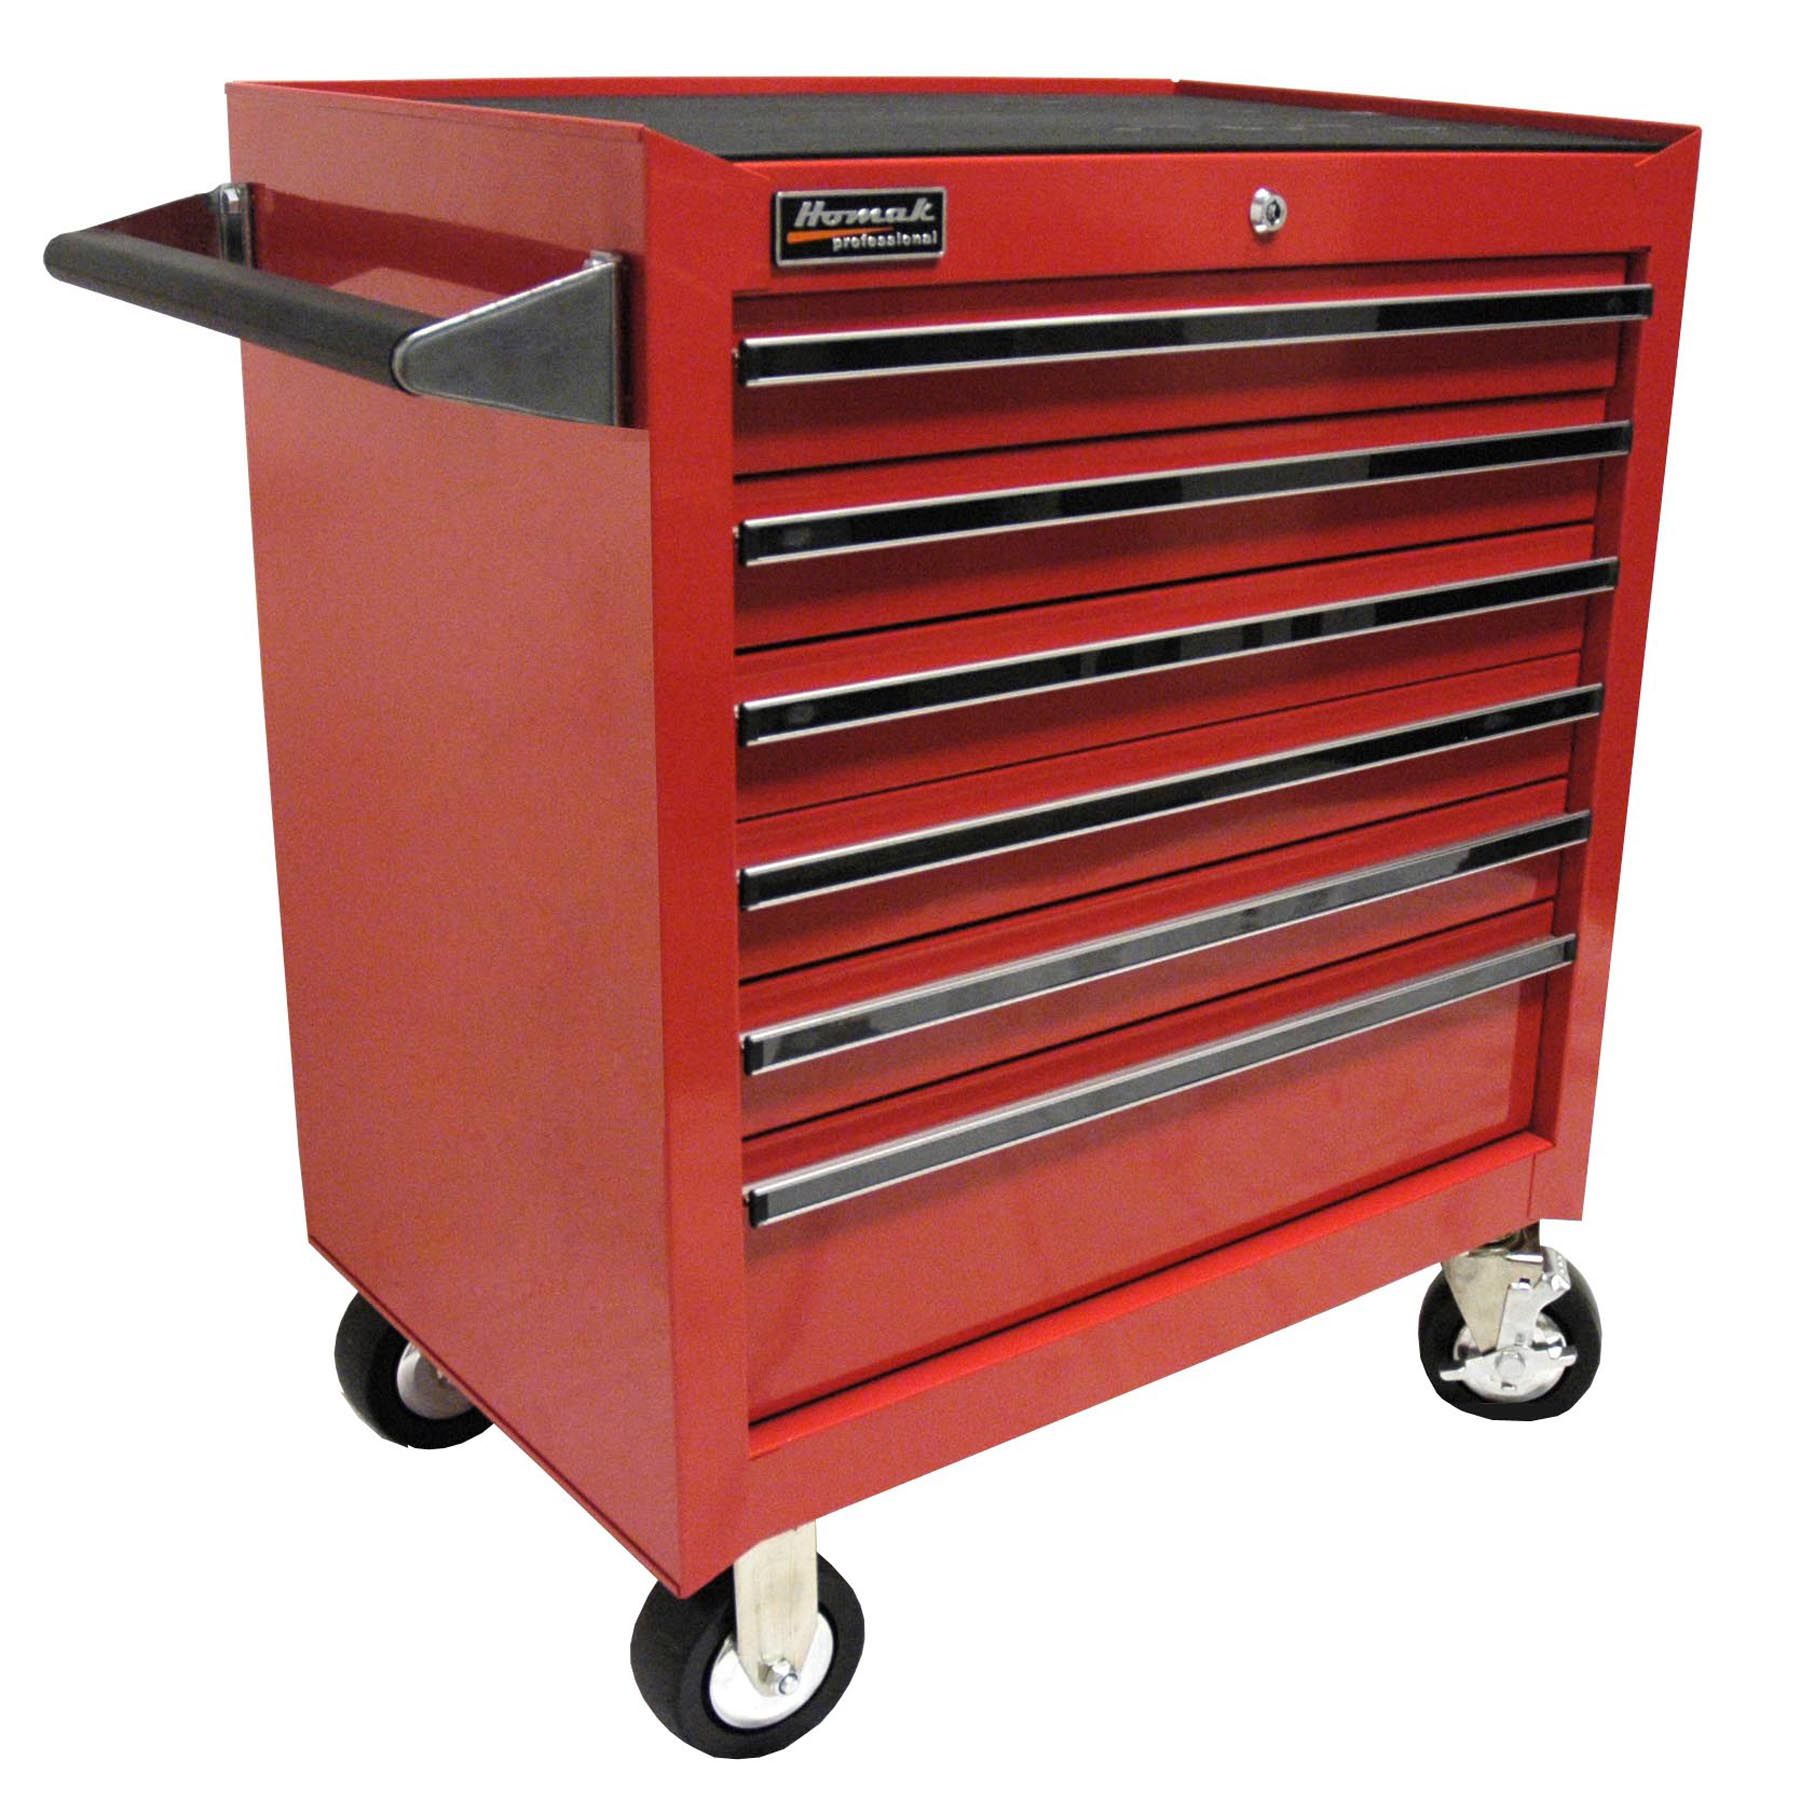 Homak 27 in Professional 6 Drawer Rolling Cabinet - Red